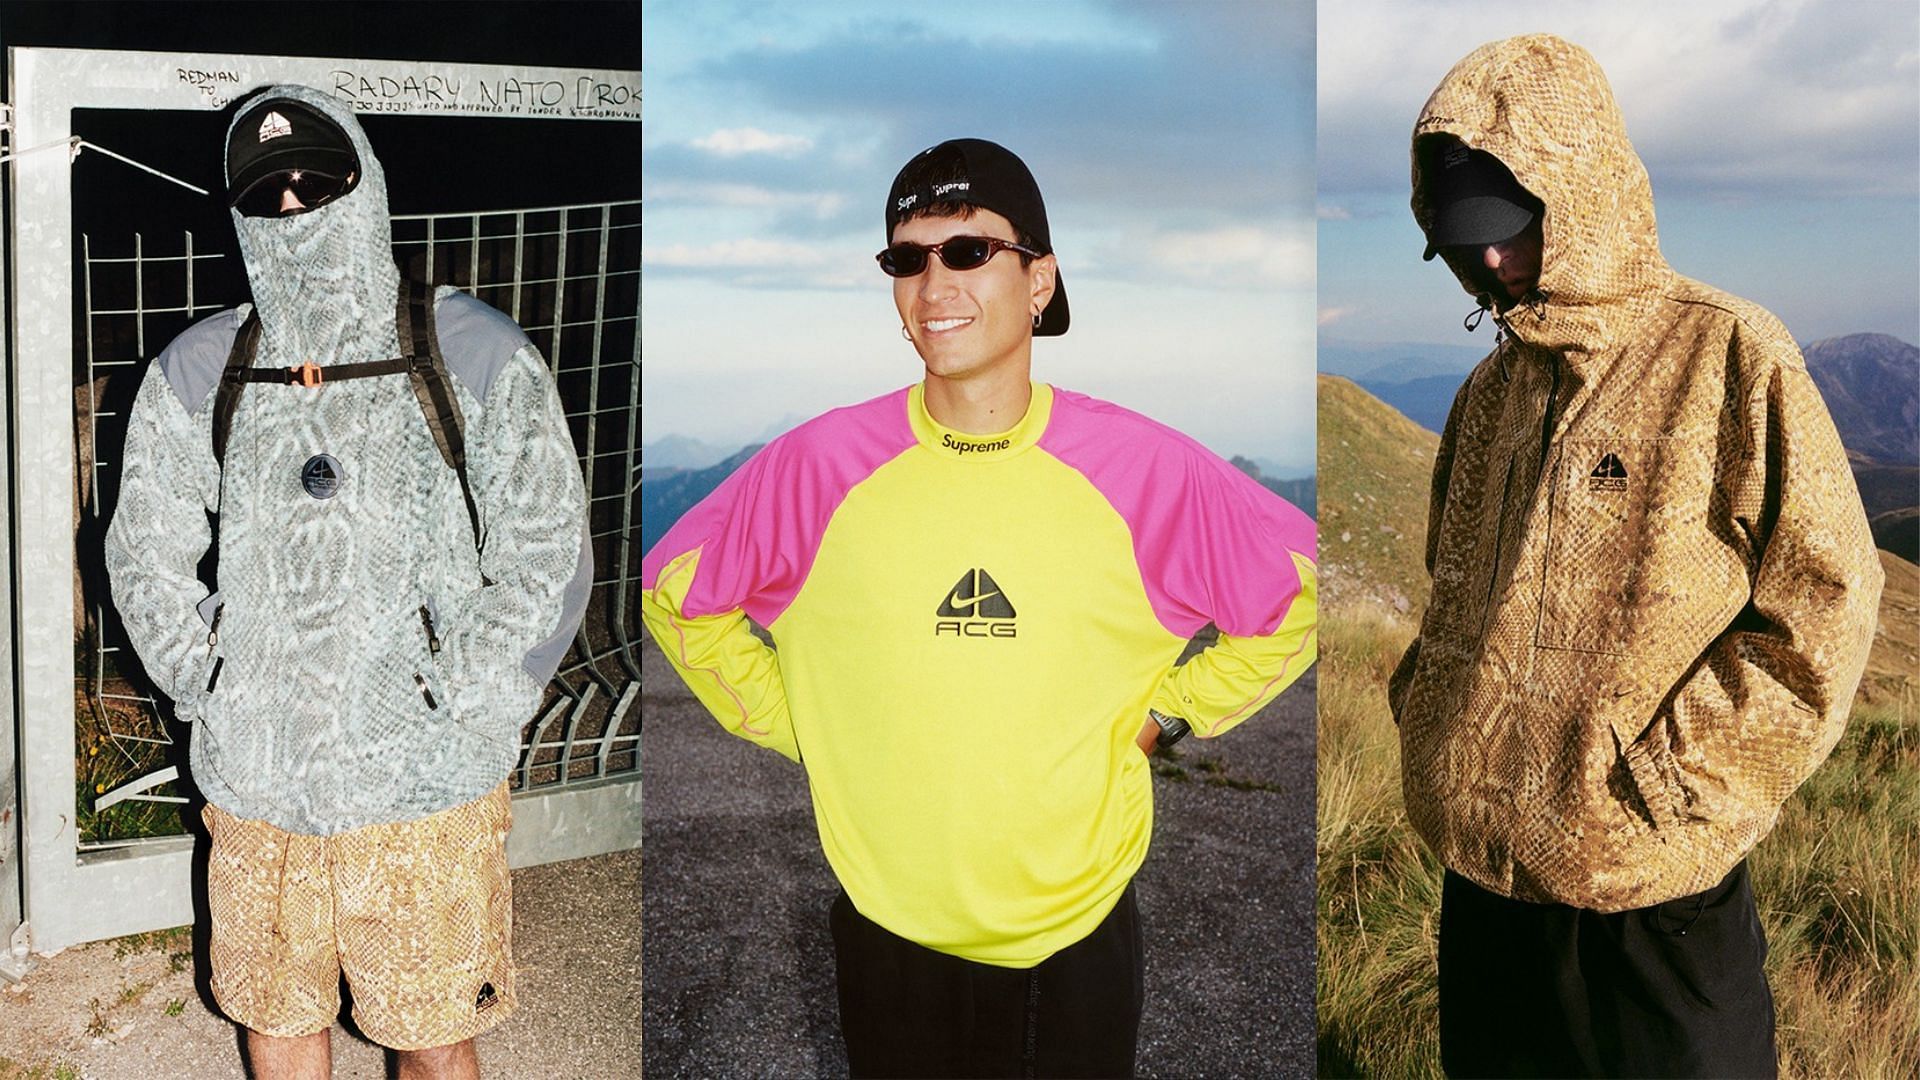 Best Style Releases This Week: Palace x Mercedes AMG, Nike ACG